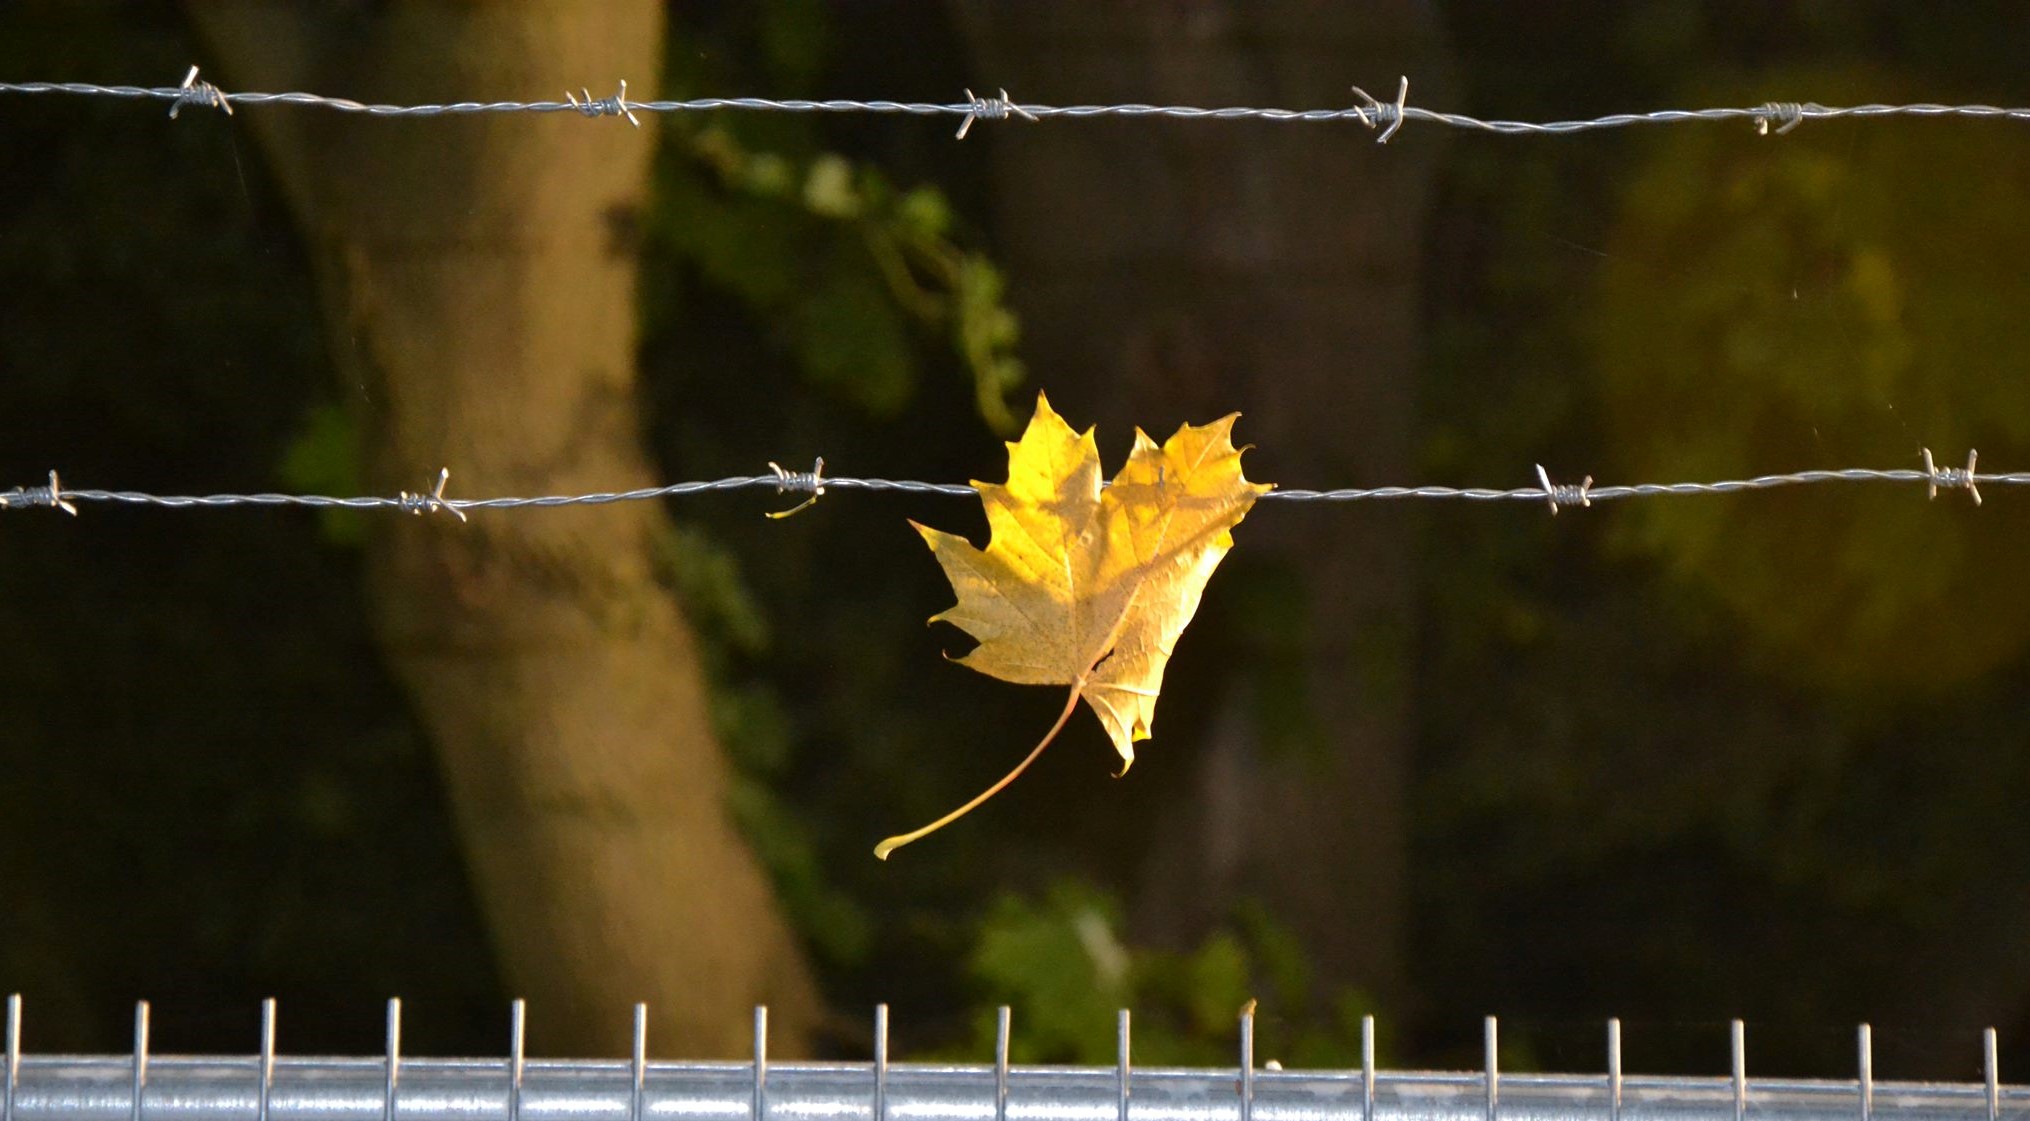 A maple leaf hangs off of a barbed wire. Below is the top of a metal railing and in the background are several blurred tree trunks and foliage.